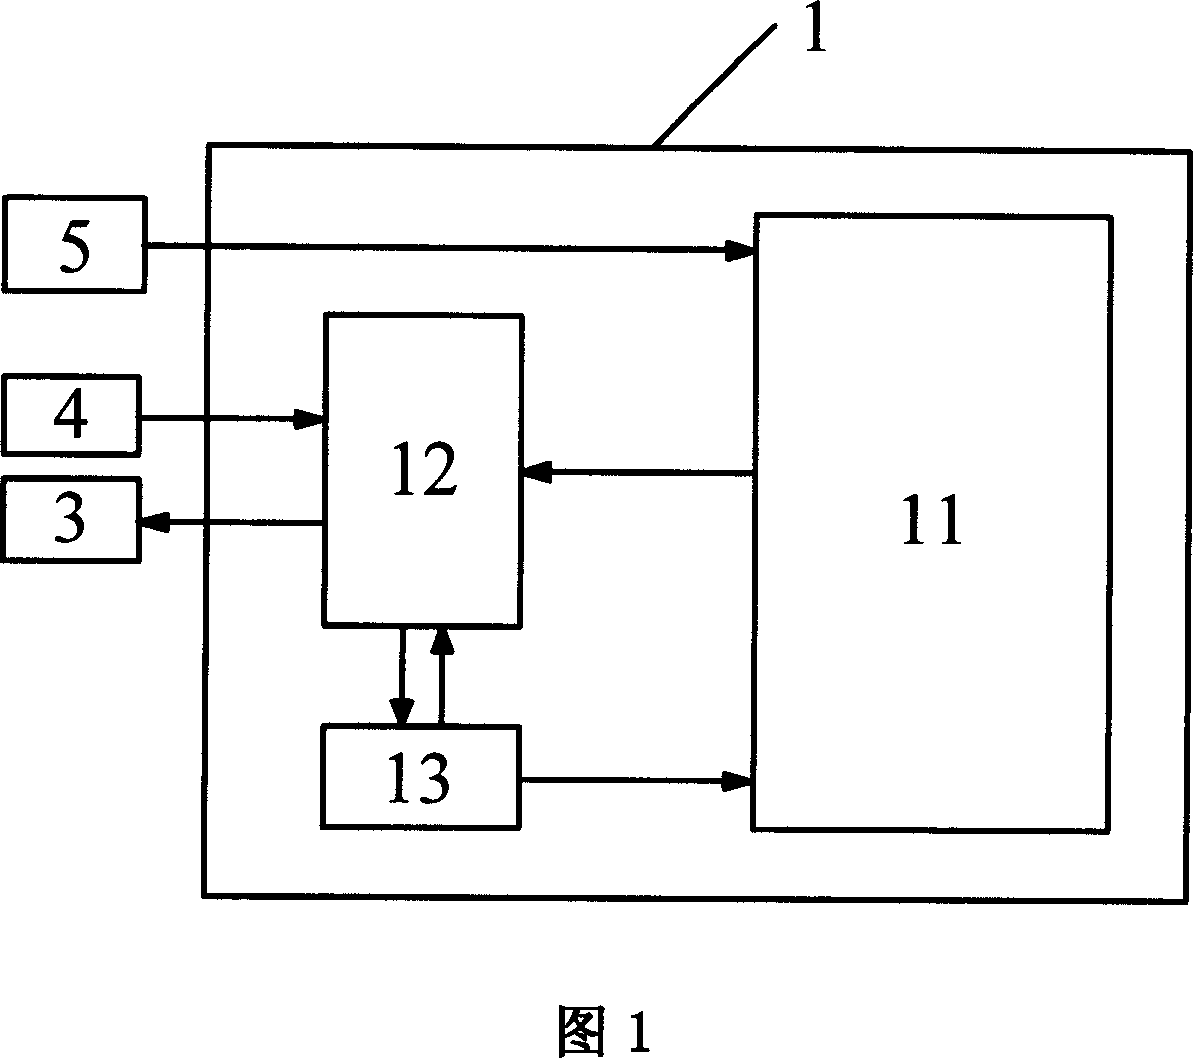 Escalator integrative frequency conversion controller based on bypass frequency conversion technology